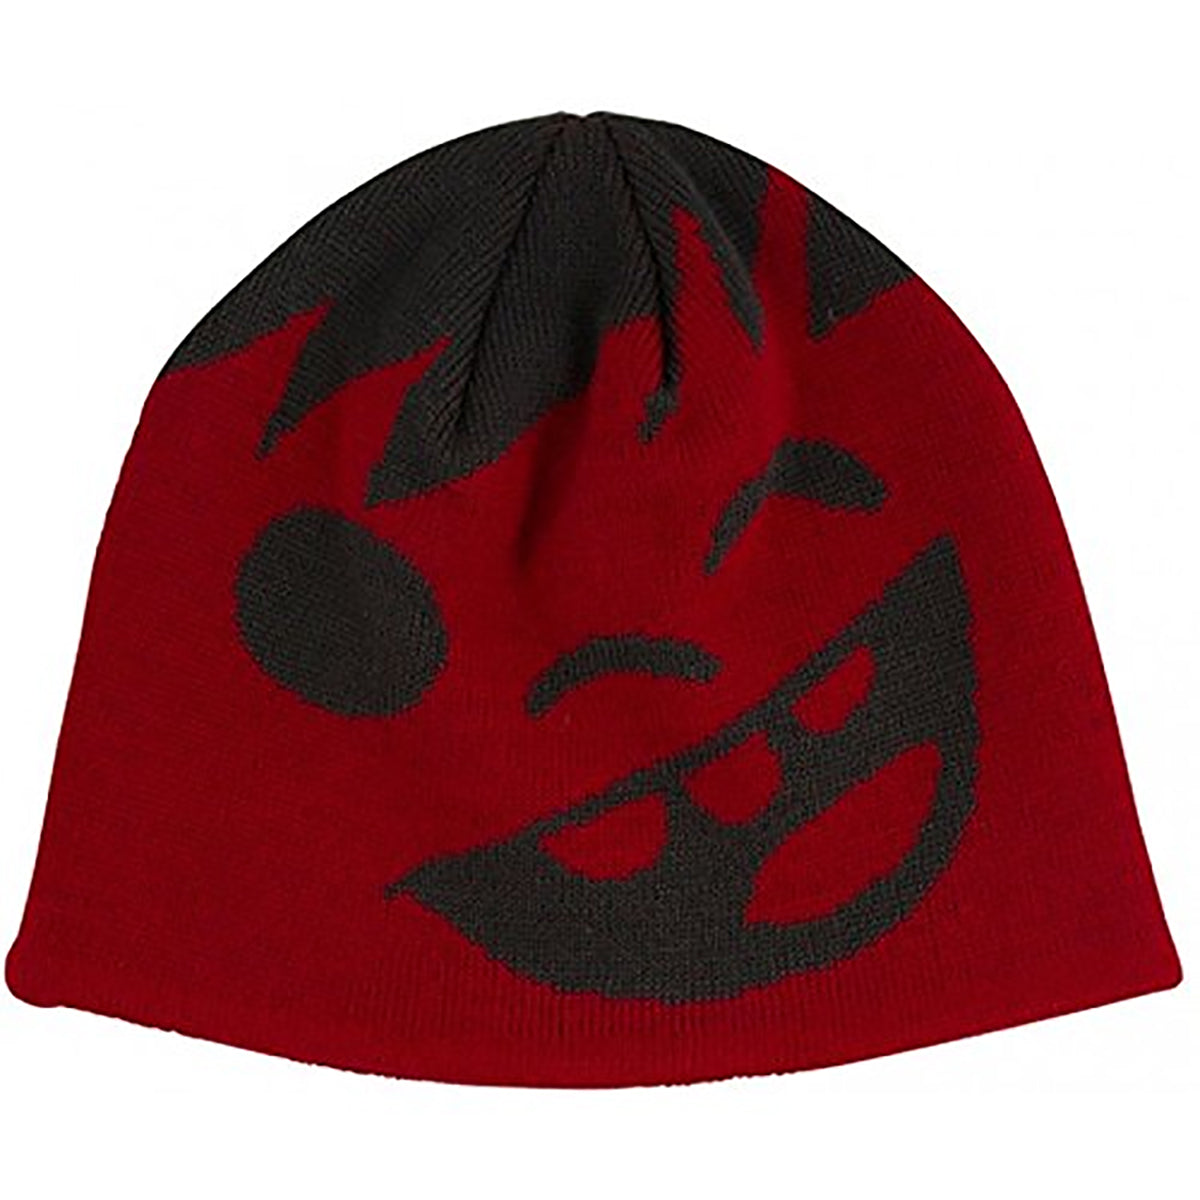 Neff Happy Youth Boys Beanie Hats (NEW - MISSING TAGS)